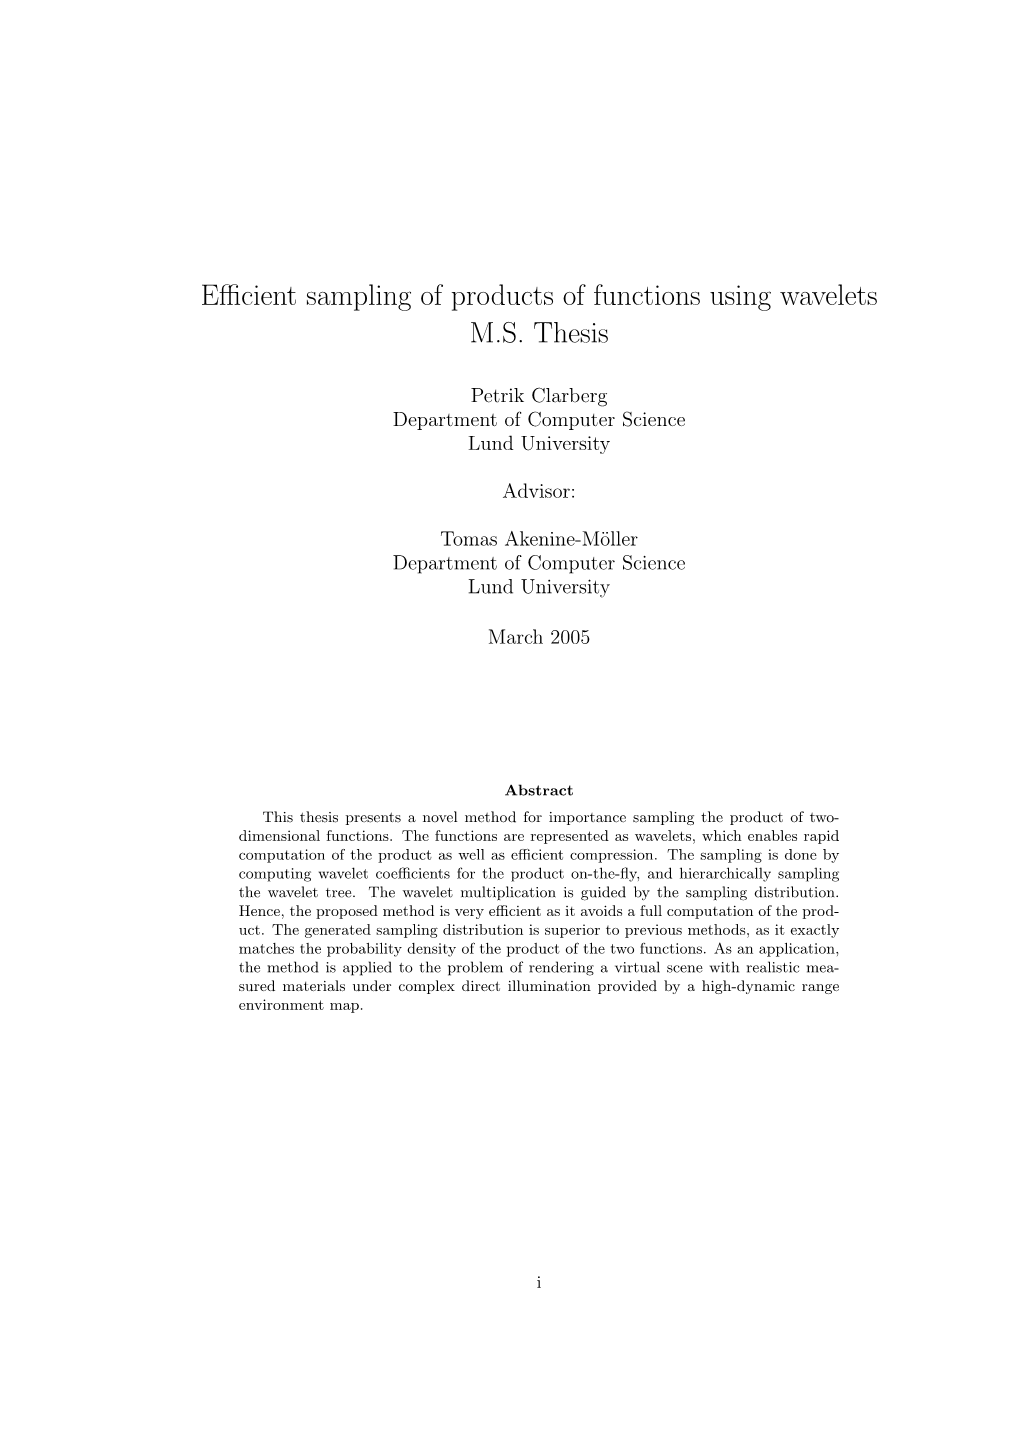 Efficient Sampling of Products of Functions Using Wavelets M.S. Thesis